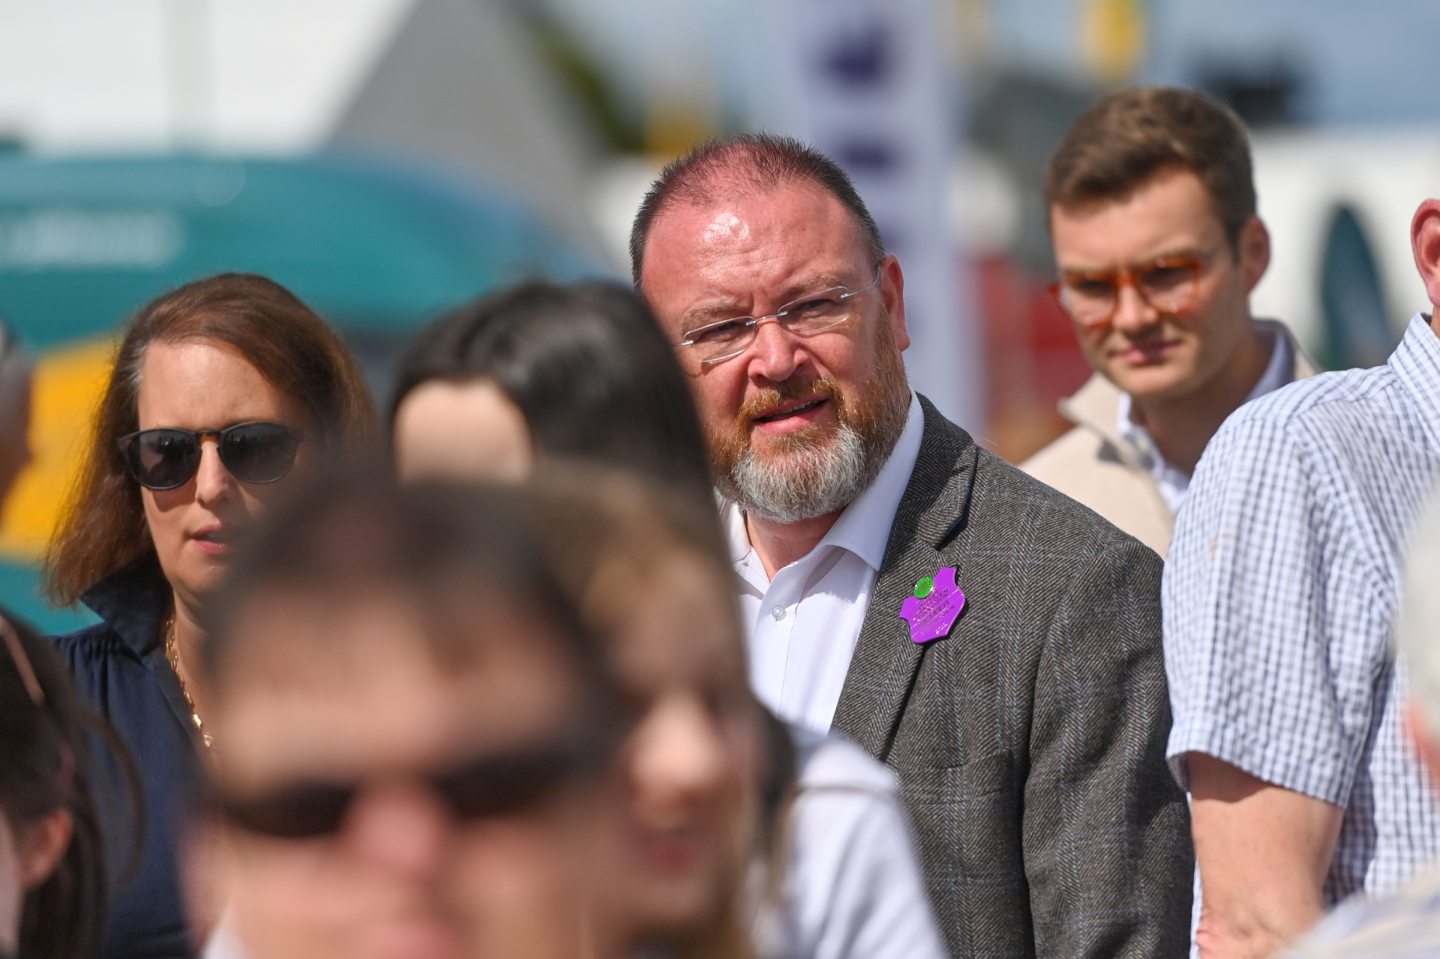 David Duguid, at the 2022 Turriff Show, says some of the ambulance waiting times in Grampian and the Highlandsare 'alarming'. Image: Scott Baxter/ DC Thomson